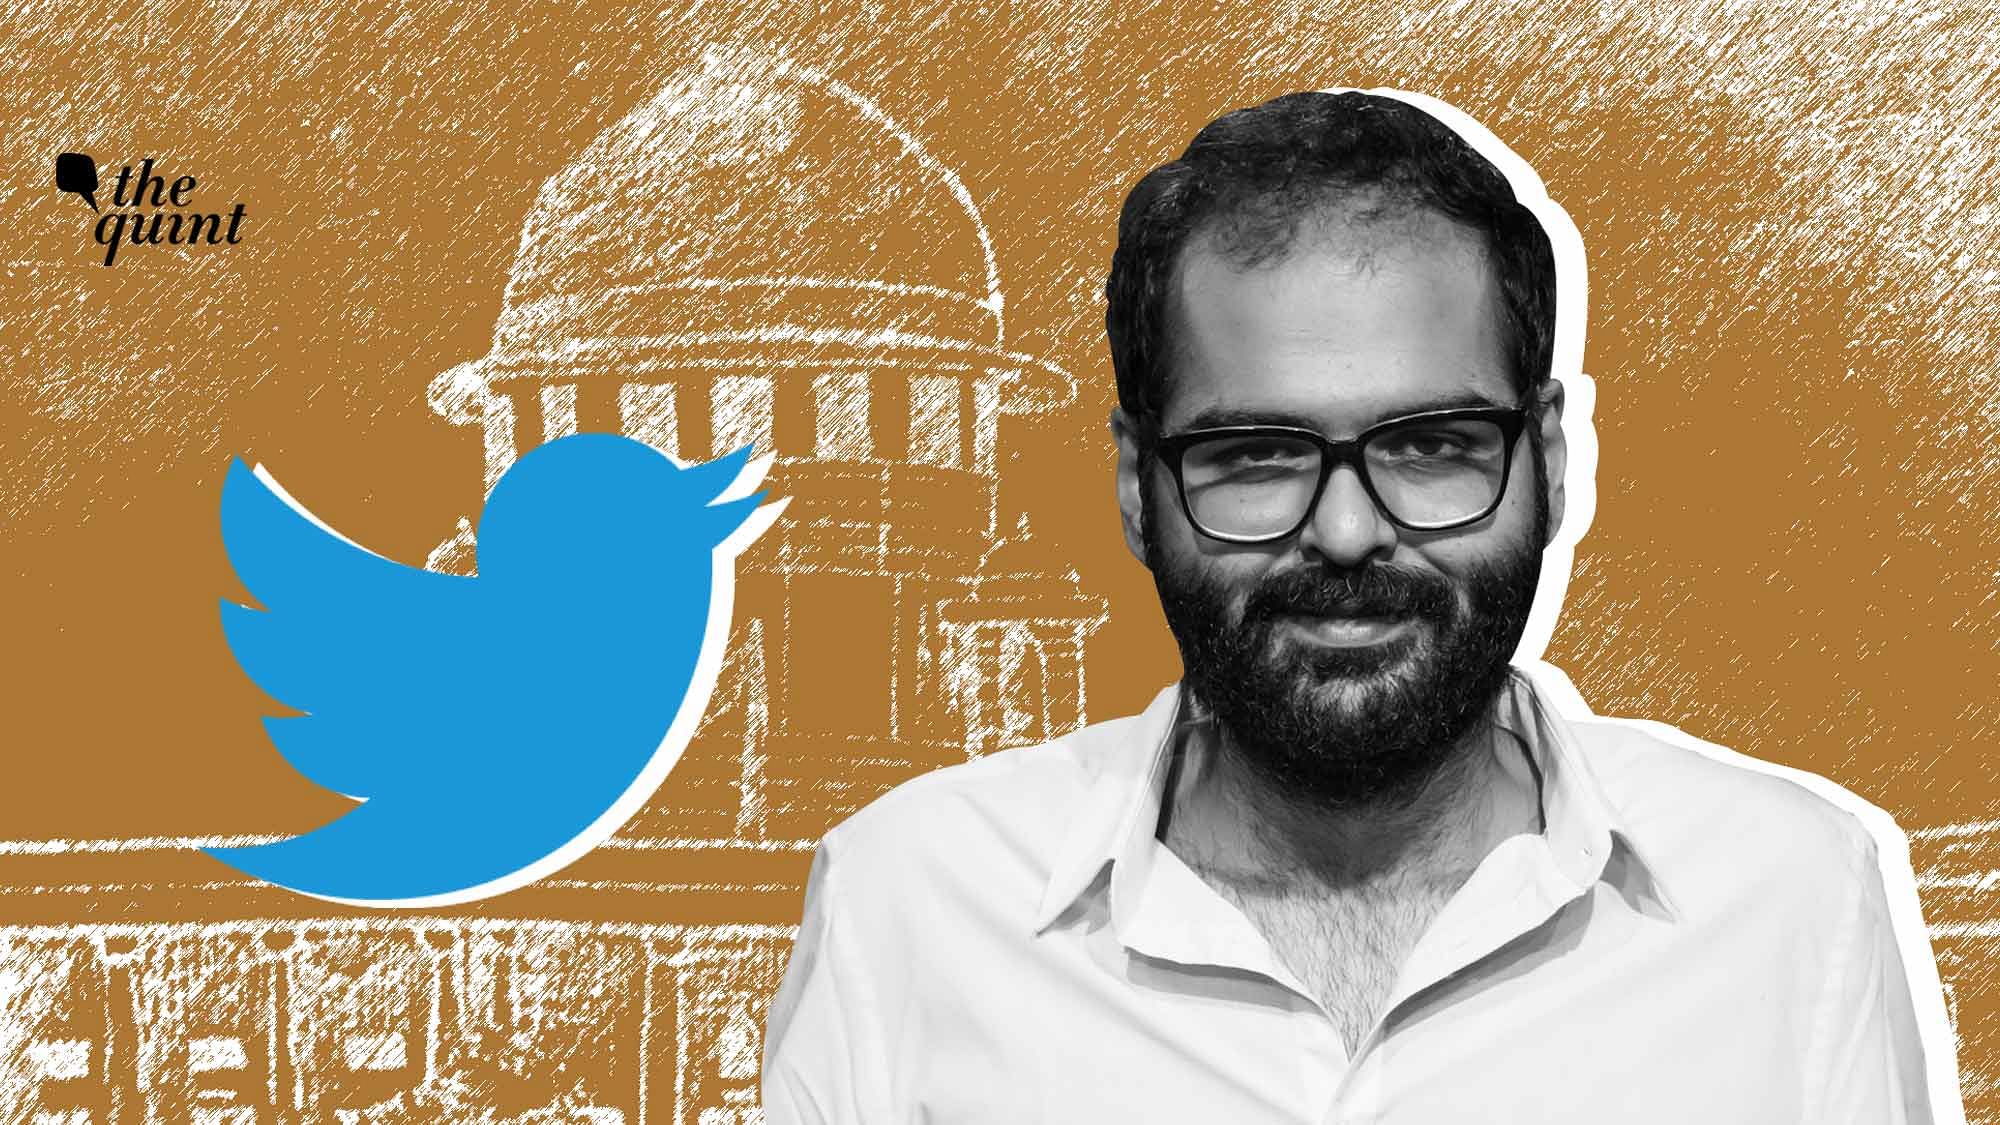 Attorney General KK Venugopal, on Thursday, 12 November, gave his consent to initiate criminal contempt of court proceedings against comedian Kunal Kamra.